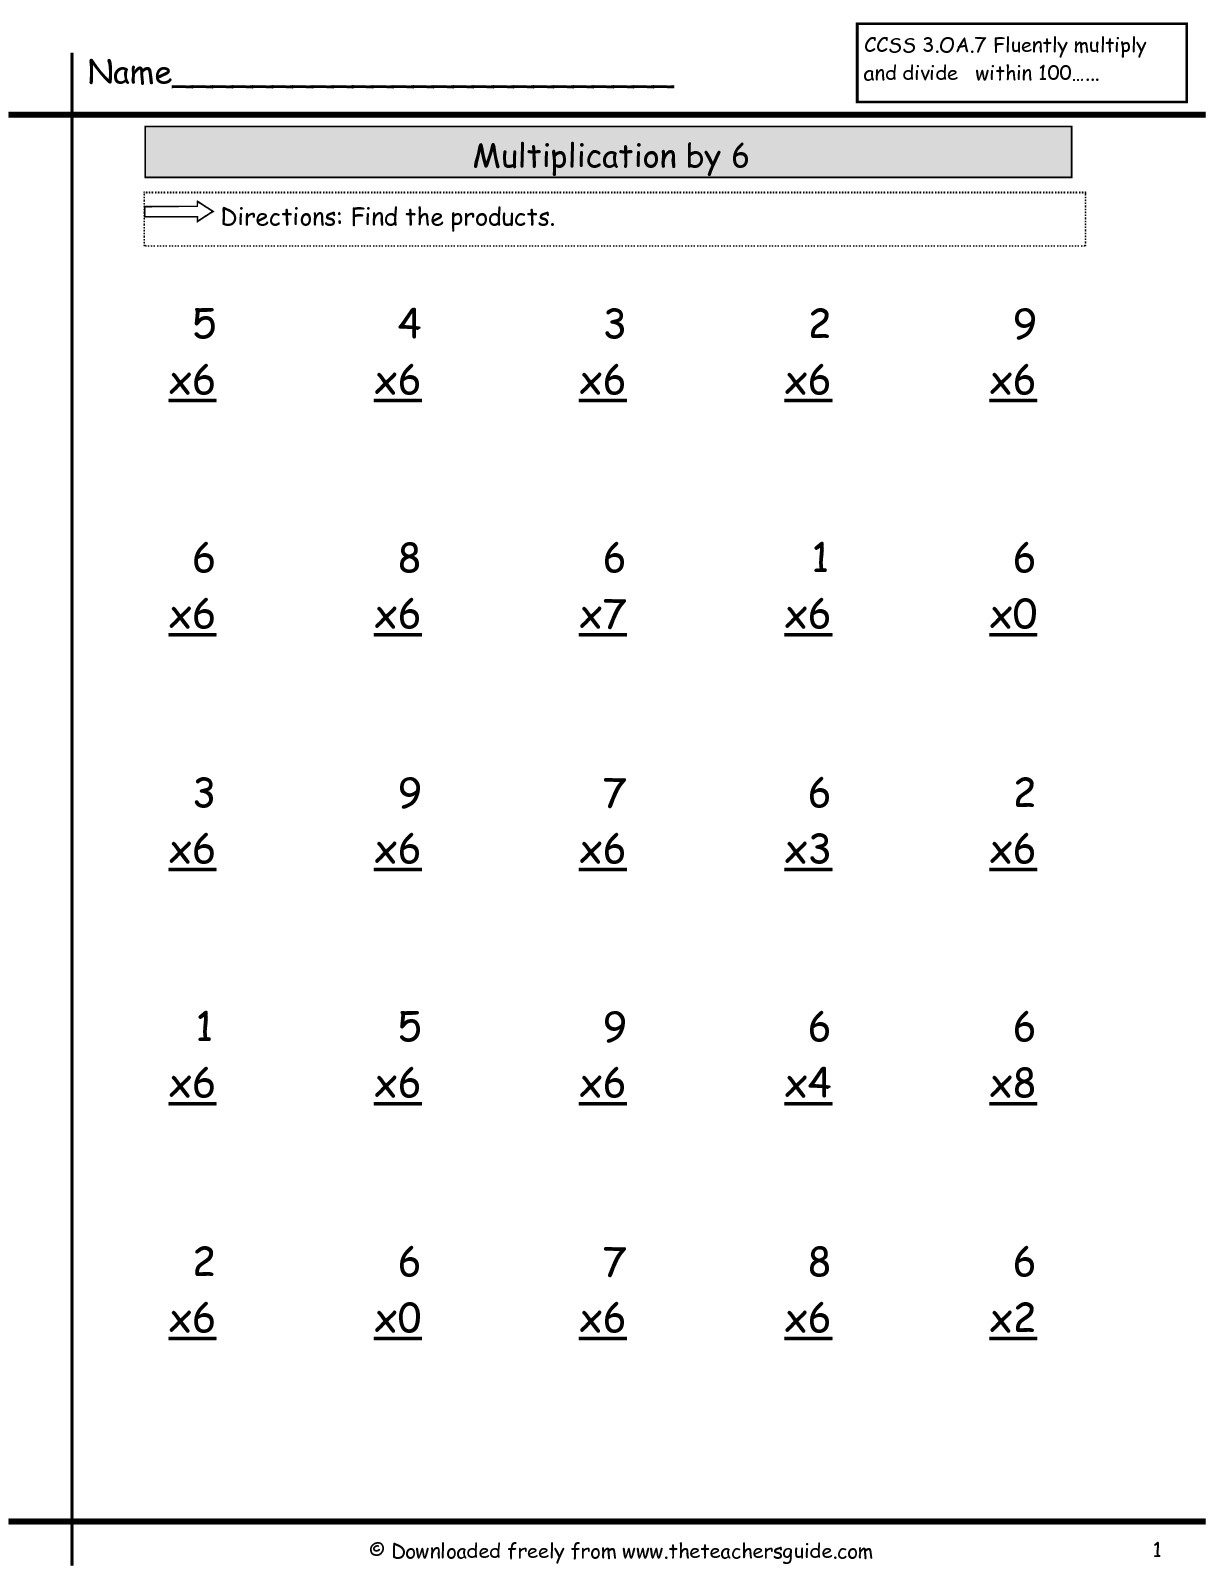 Multiplication Facts Worksheets From The Teacher&amp;#039;s Guide for Multiplication Worksheets 7S And 8S